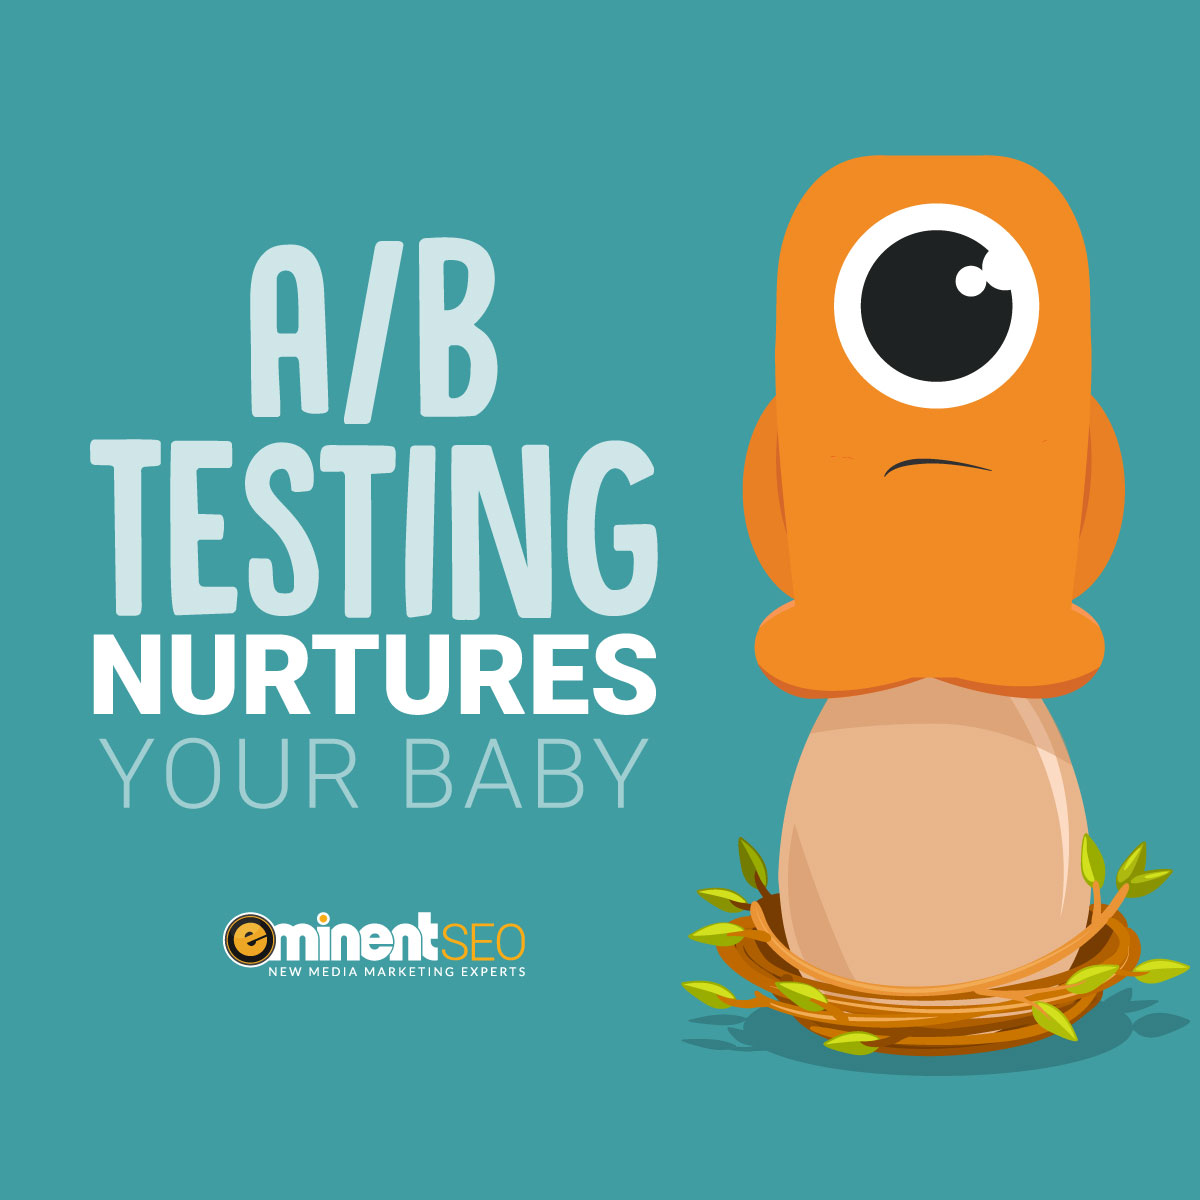 A-B Testing Nutures Your Baby - Max Monster Egg - ESEO